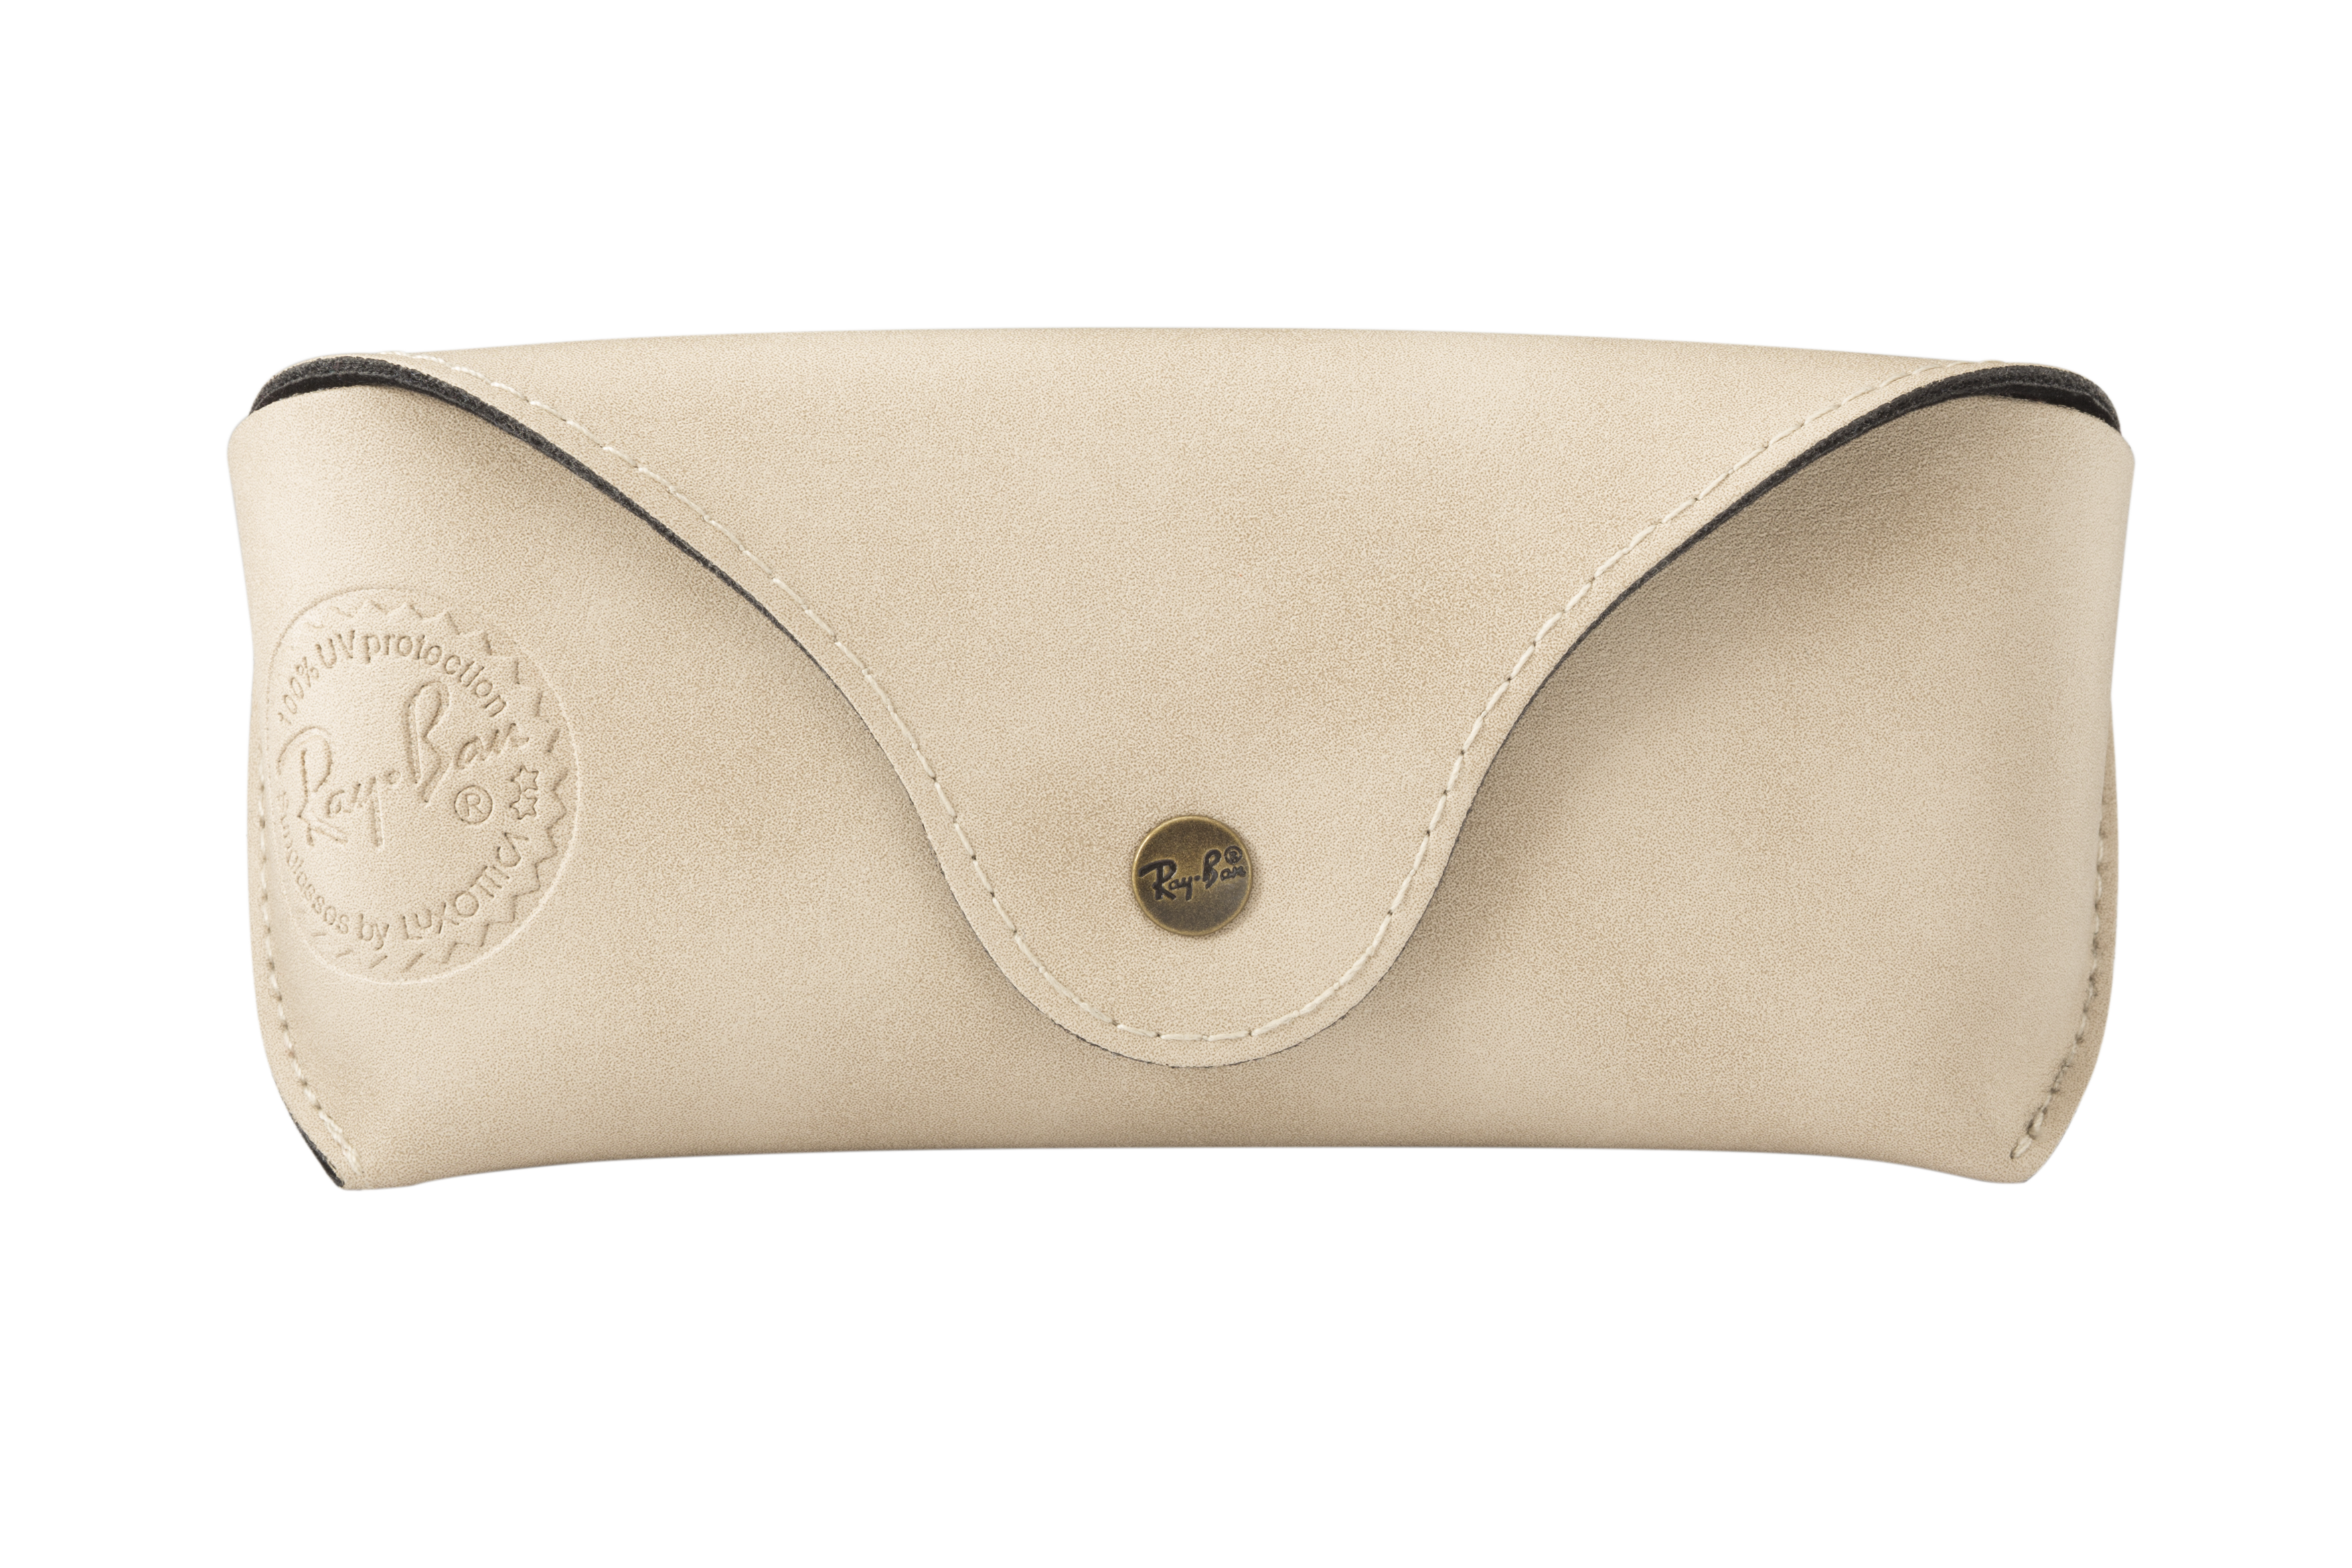 glasses case ray ban